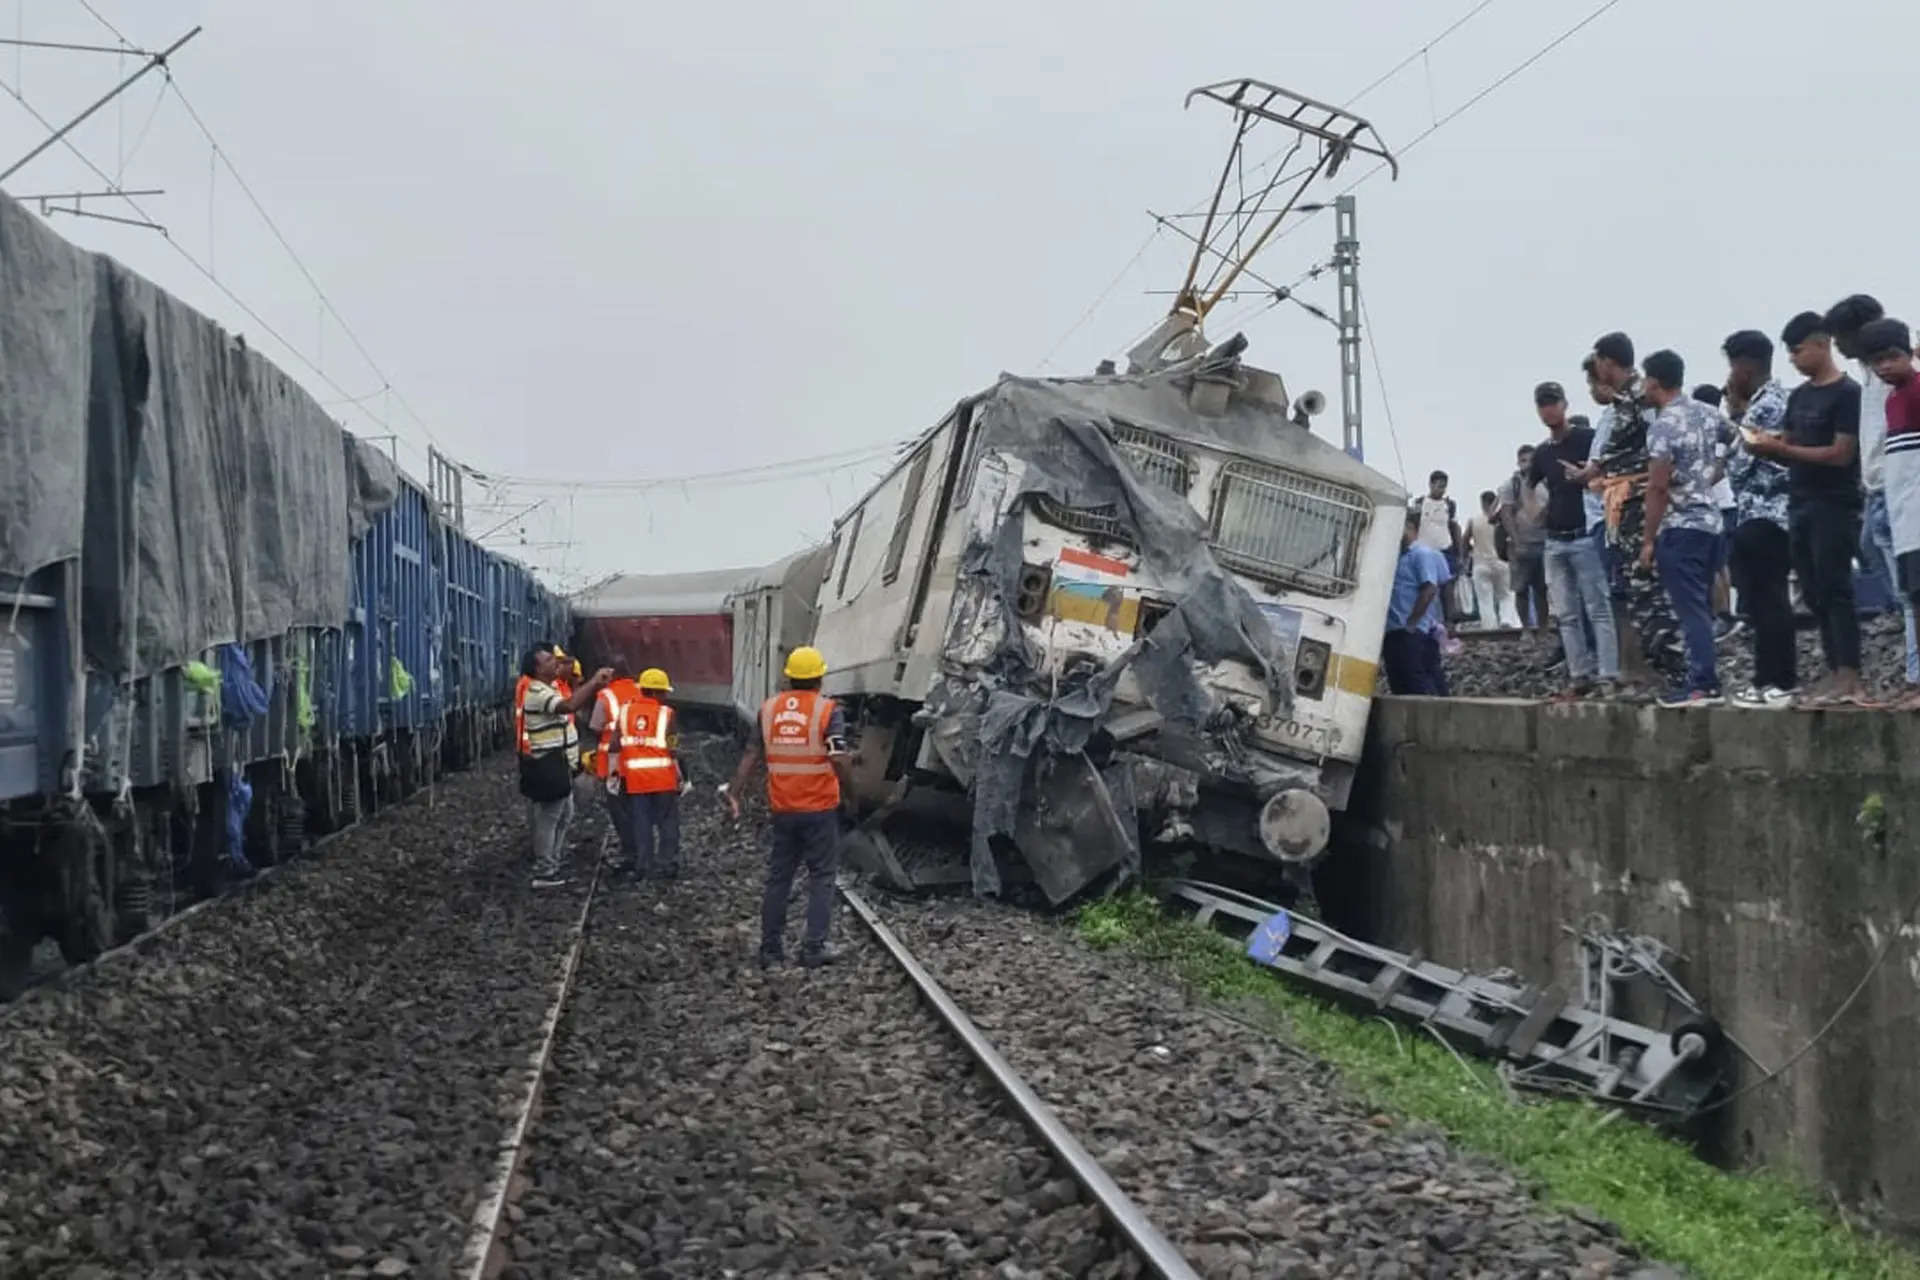 'After side collision, goods train dragged derailed wagon for 1 km'